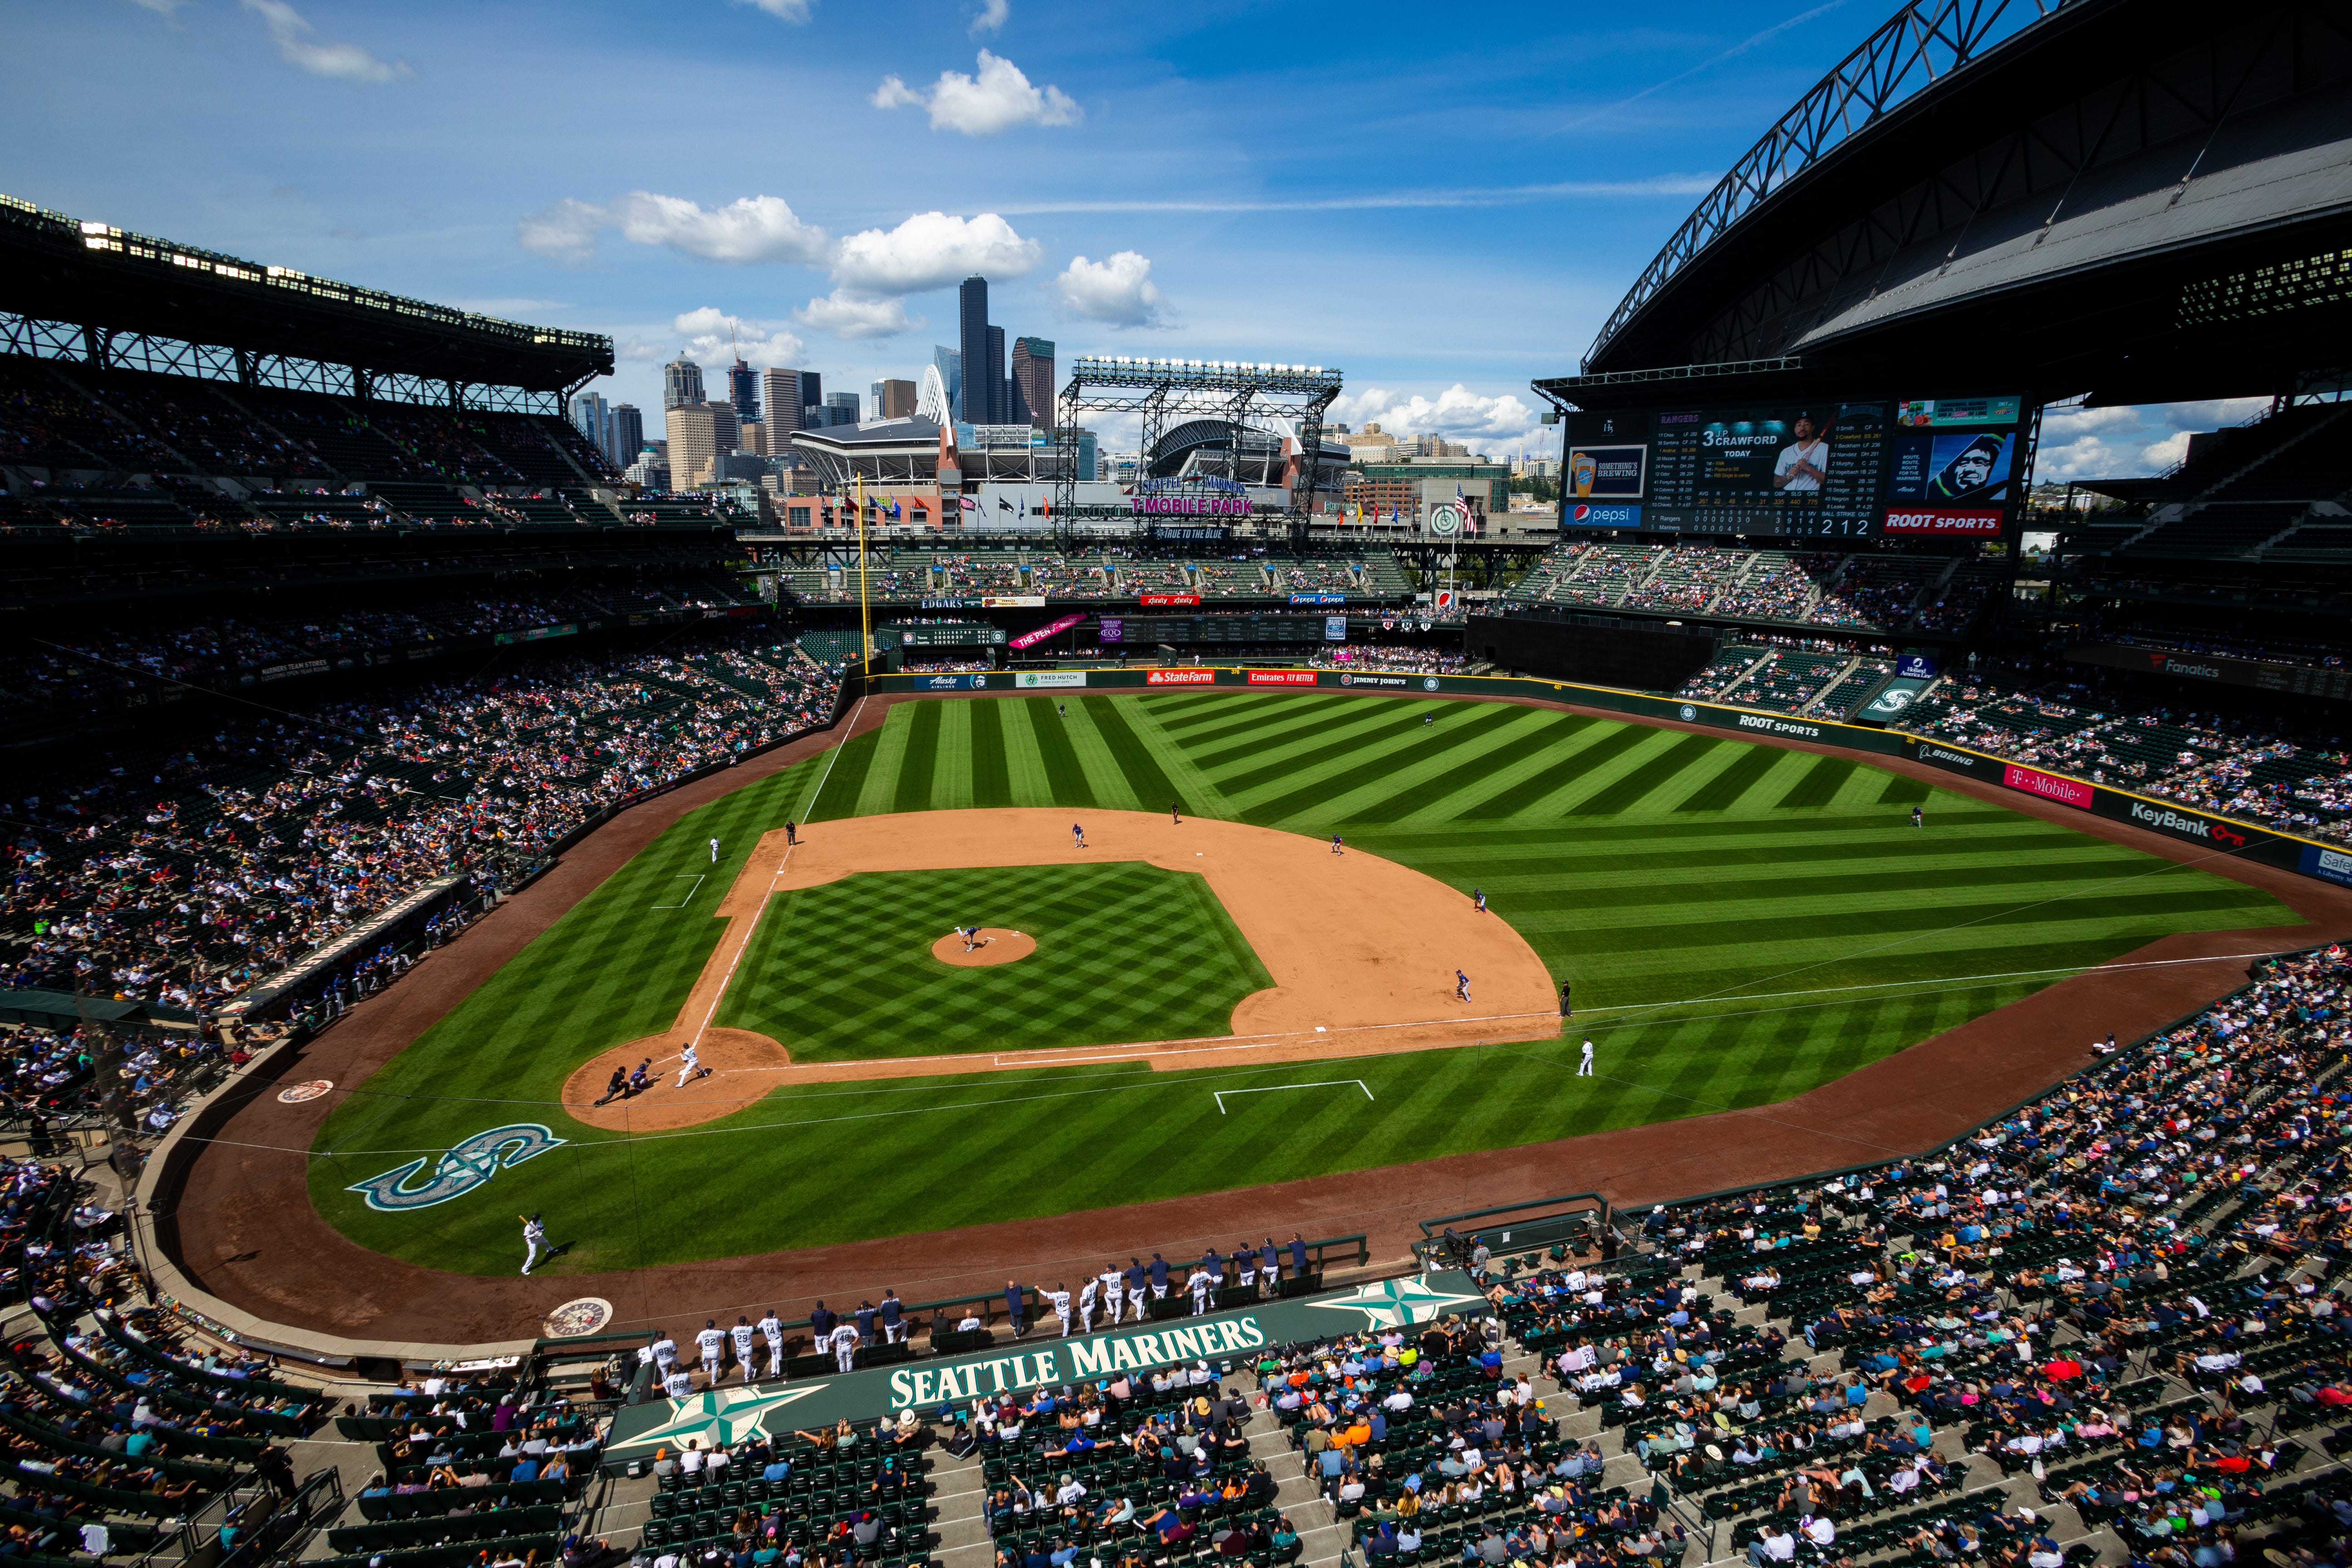 Bloodworks Northwest And Seattle Mariners Team Up To Save Lives By Marinerspr From The Corner Of Edgar Dave